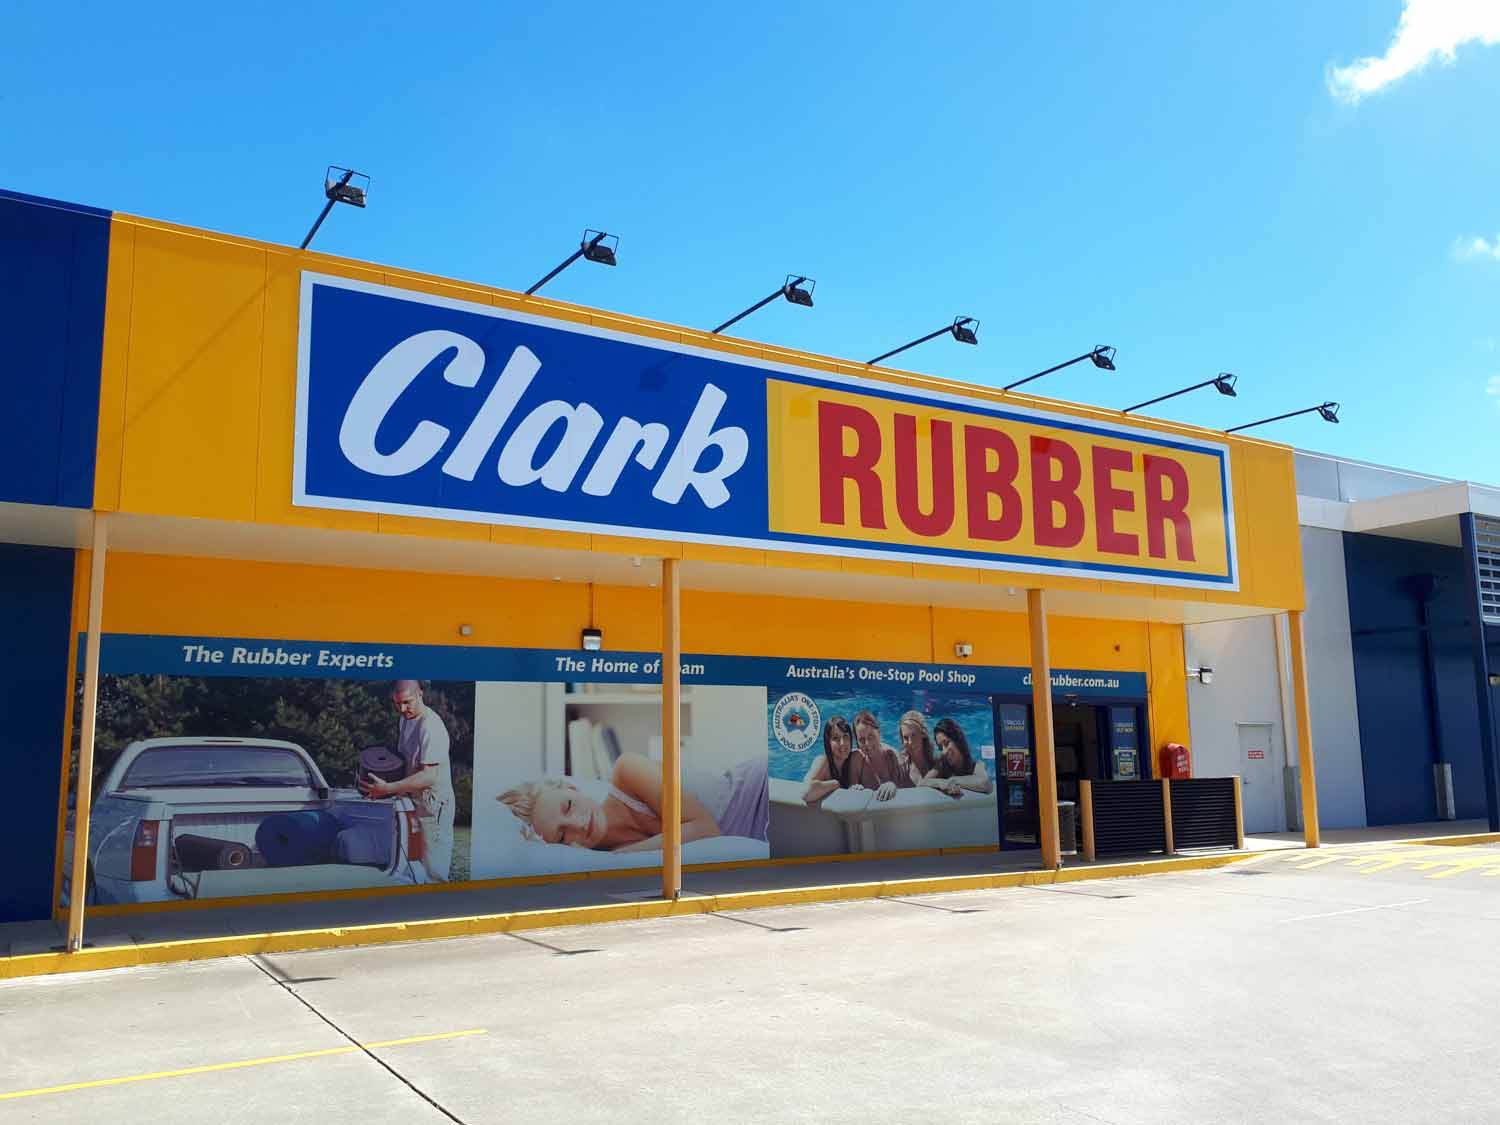 clark rubber building with signage